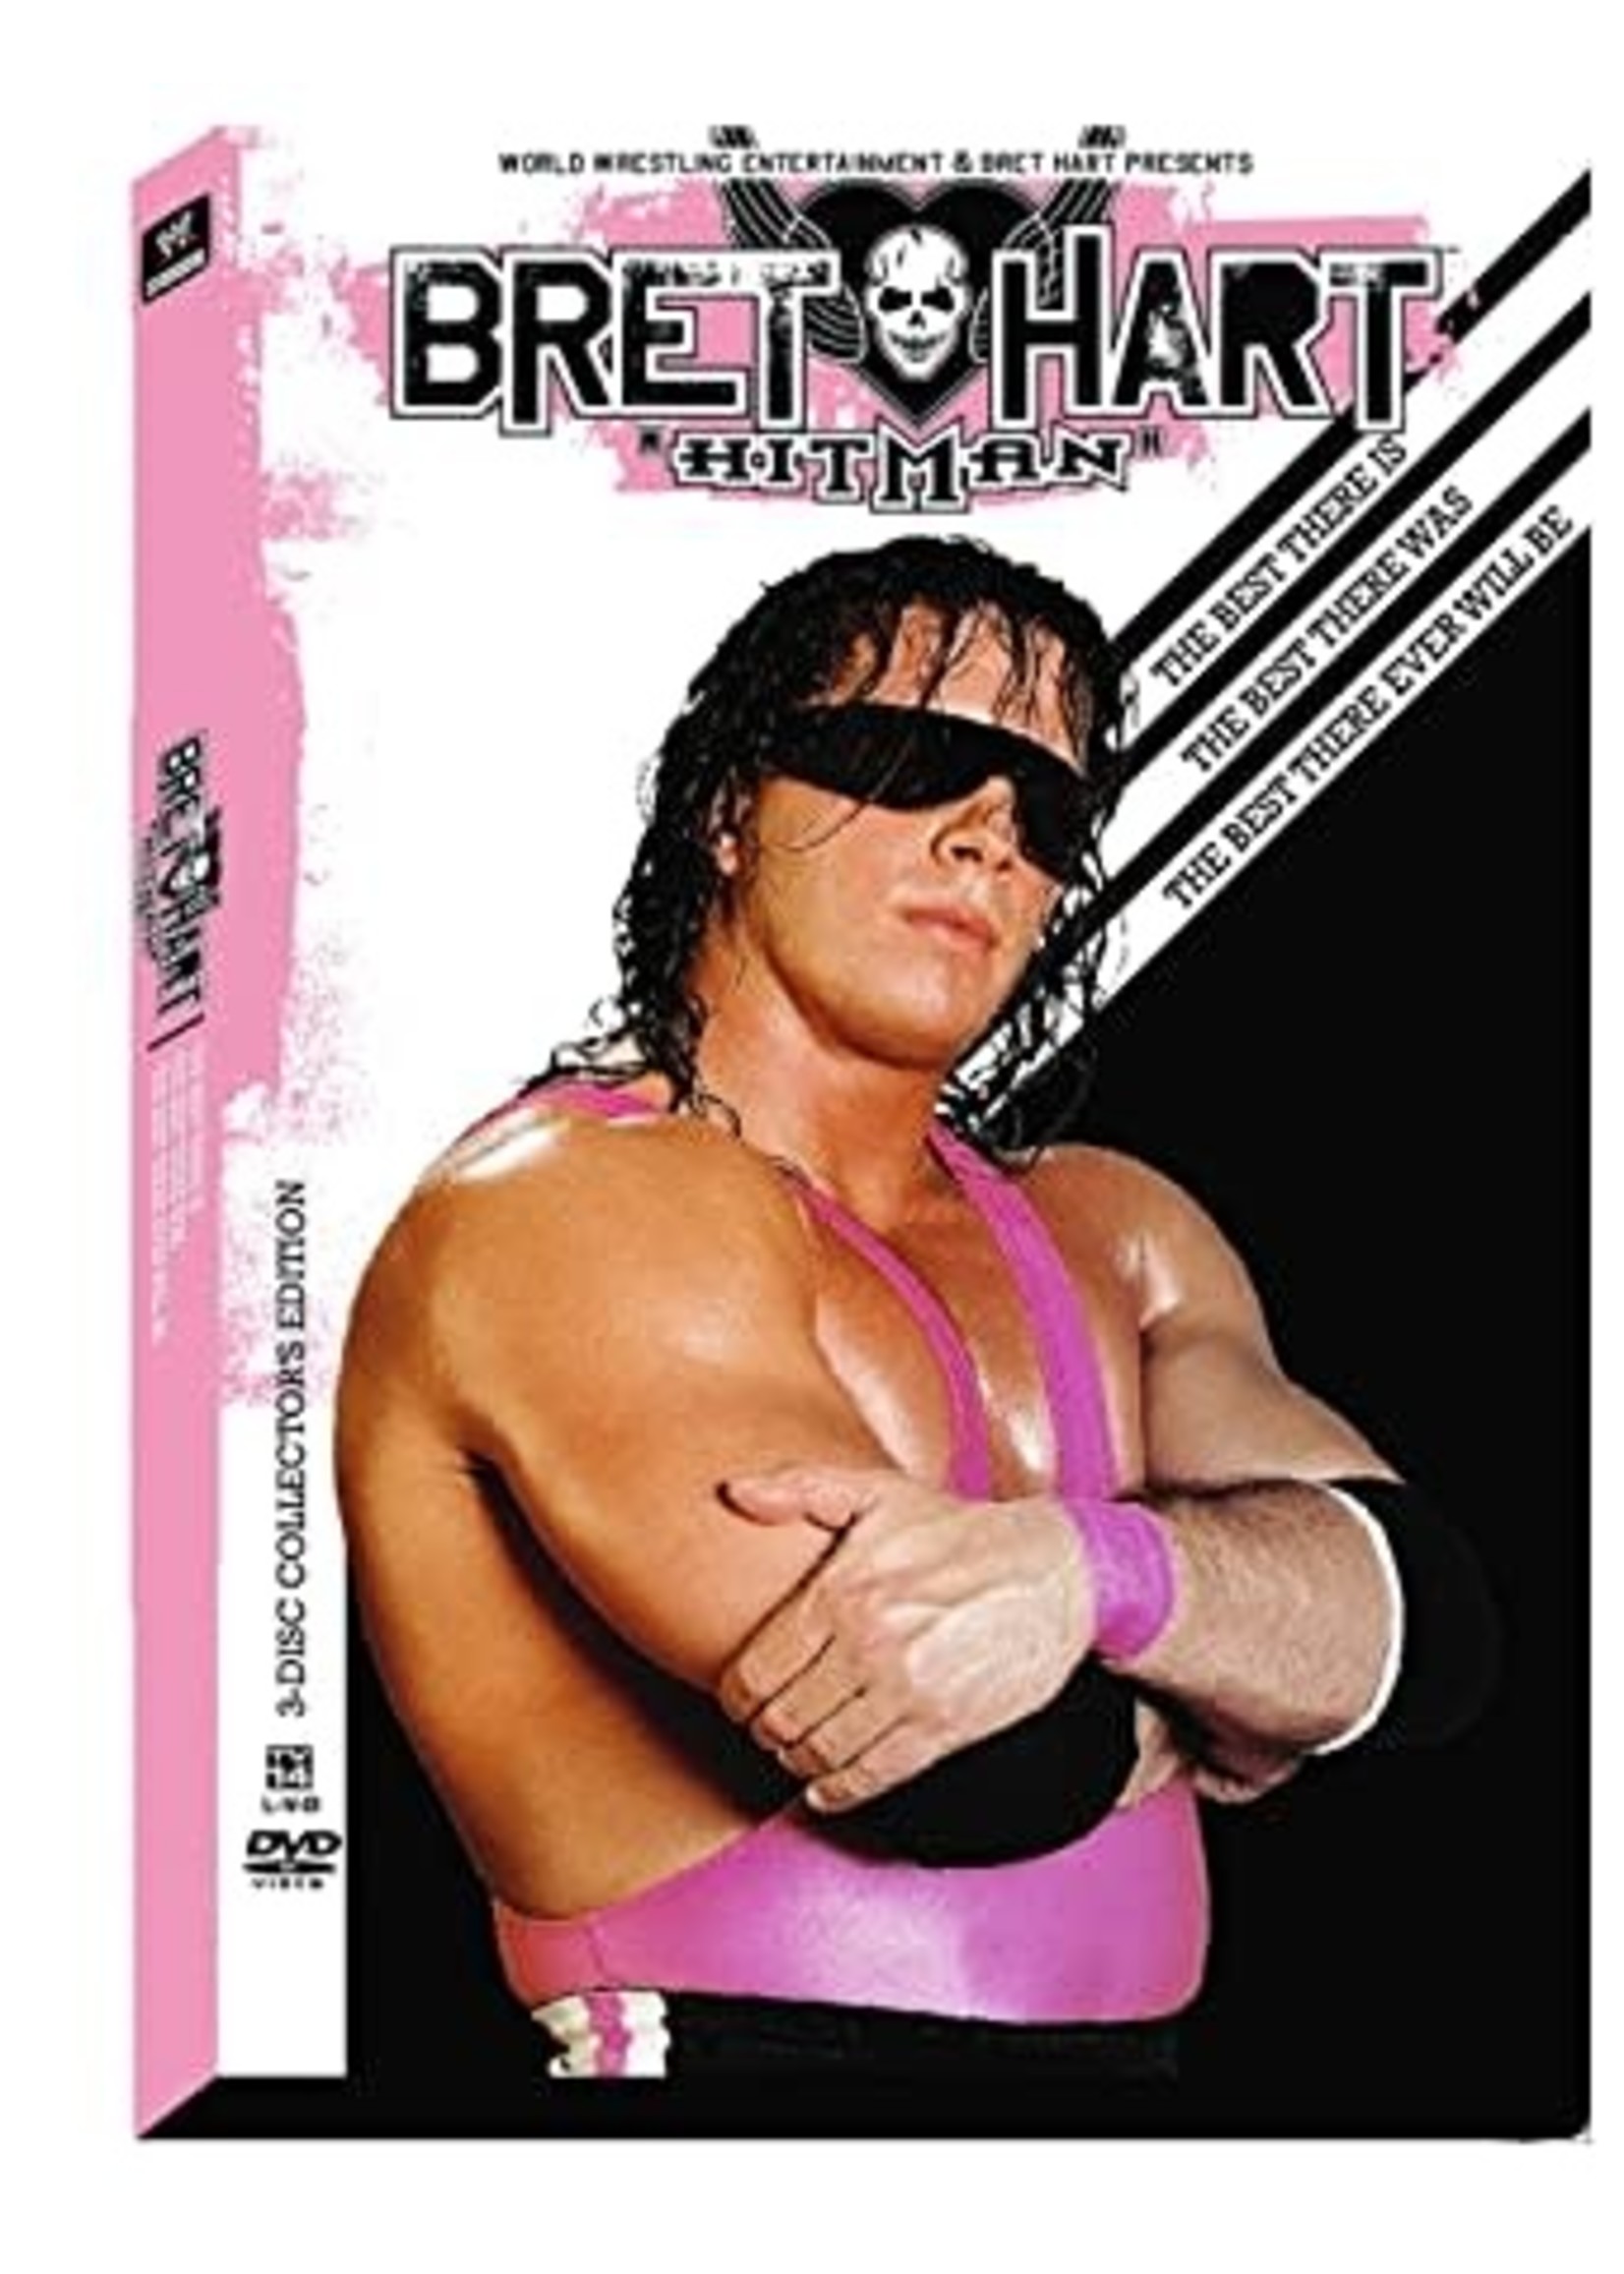 WWE: Bret "Hitman" Hart - The Best There Is, The Best There Was, The Best There Ever Will Be DVD